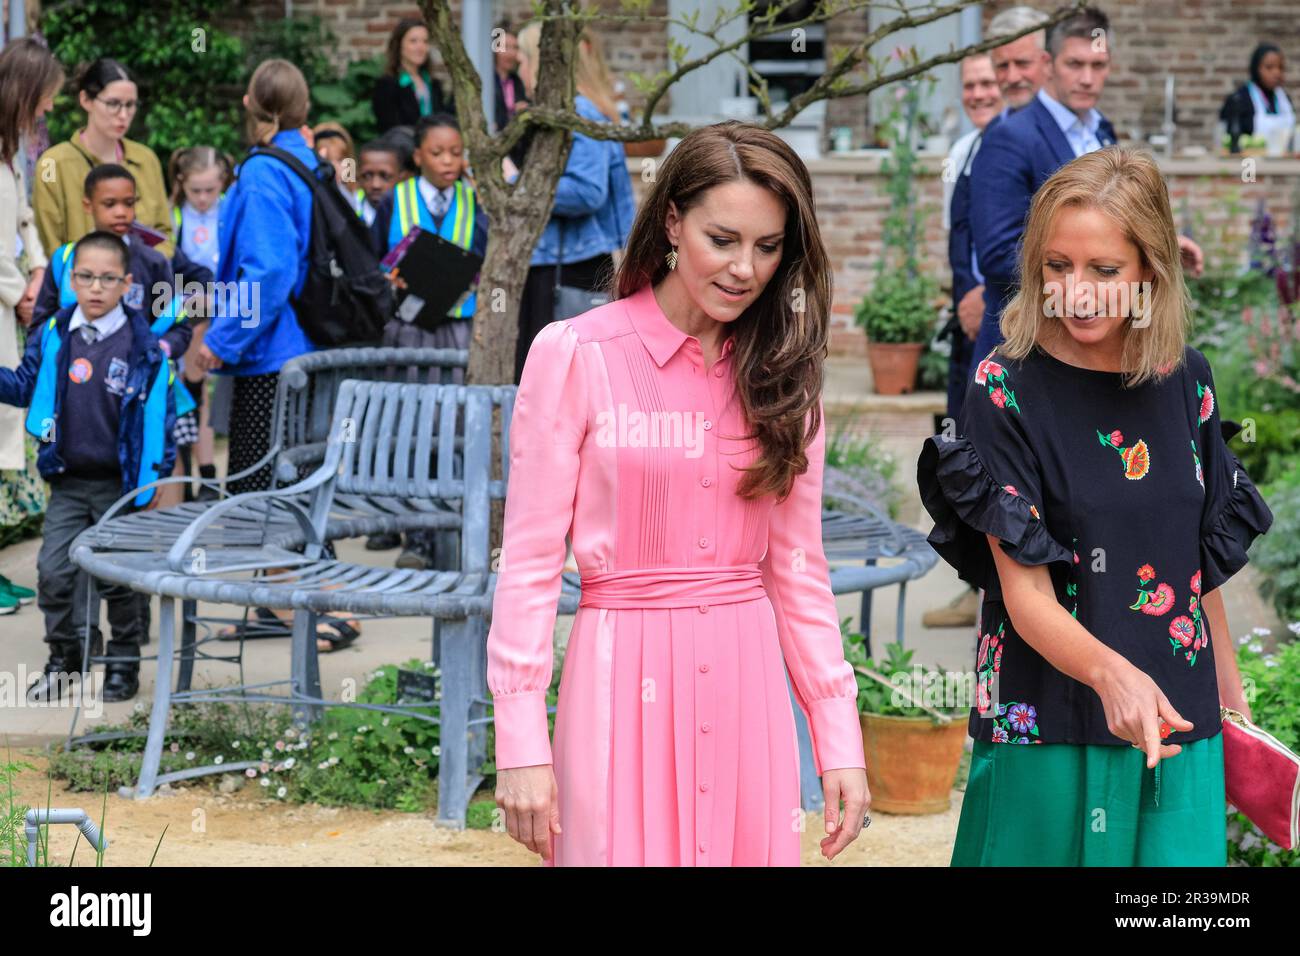 London, UK. 22nd May, 2023. Catherine, the Princess of Wales visits Chelsea Flower Show. She first meets school children for the first ever children's picknick at the show, then visited the Savill's Garden, Samaritans Garden and garden of the Royal Enthomological Society. Press day at the annual RHS Chelsea Flower Show, showcasing garden designs, products, floral displays and all things horticultural from May 23-27. Credit: Imageplotter/Alamy Live News Stock Photo